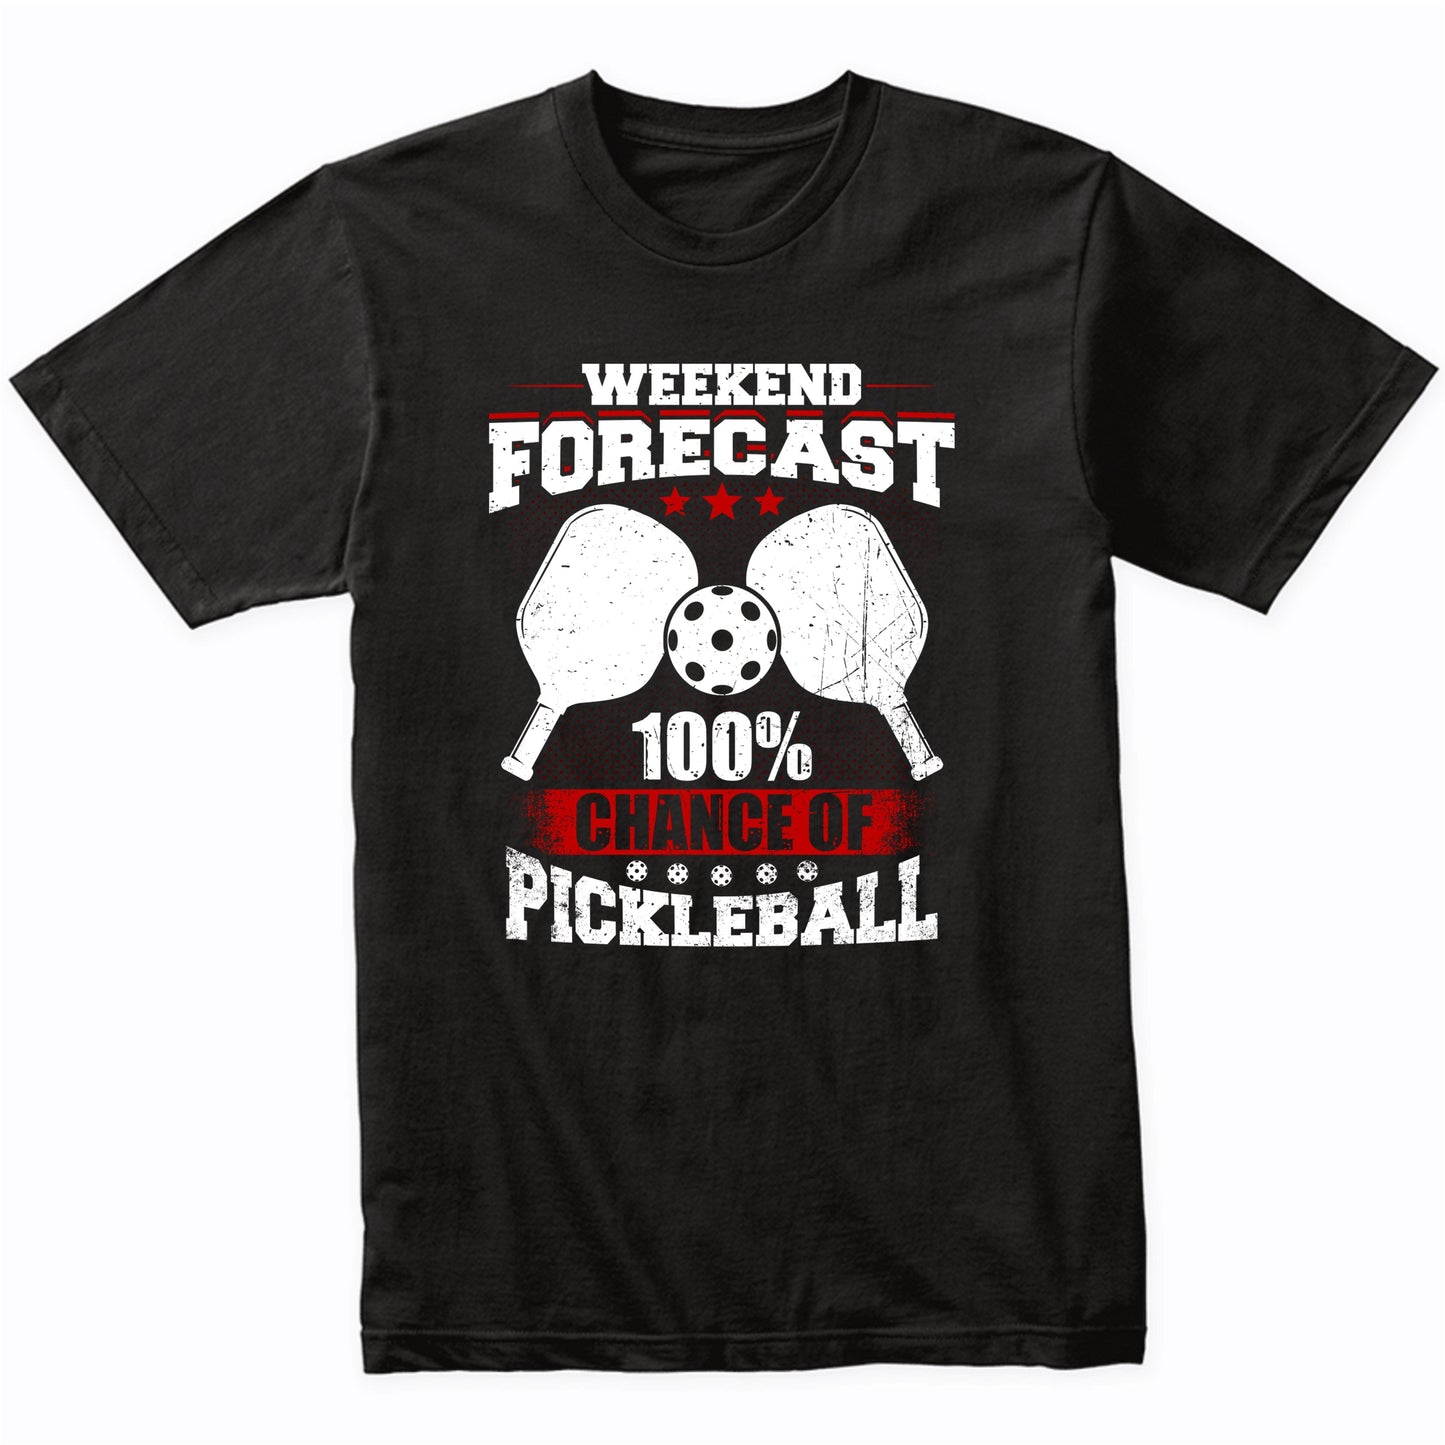 Weekend Forecast 100% Chance Of Pickleball T-Shirt